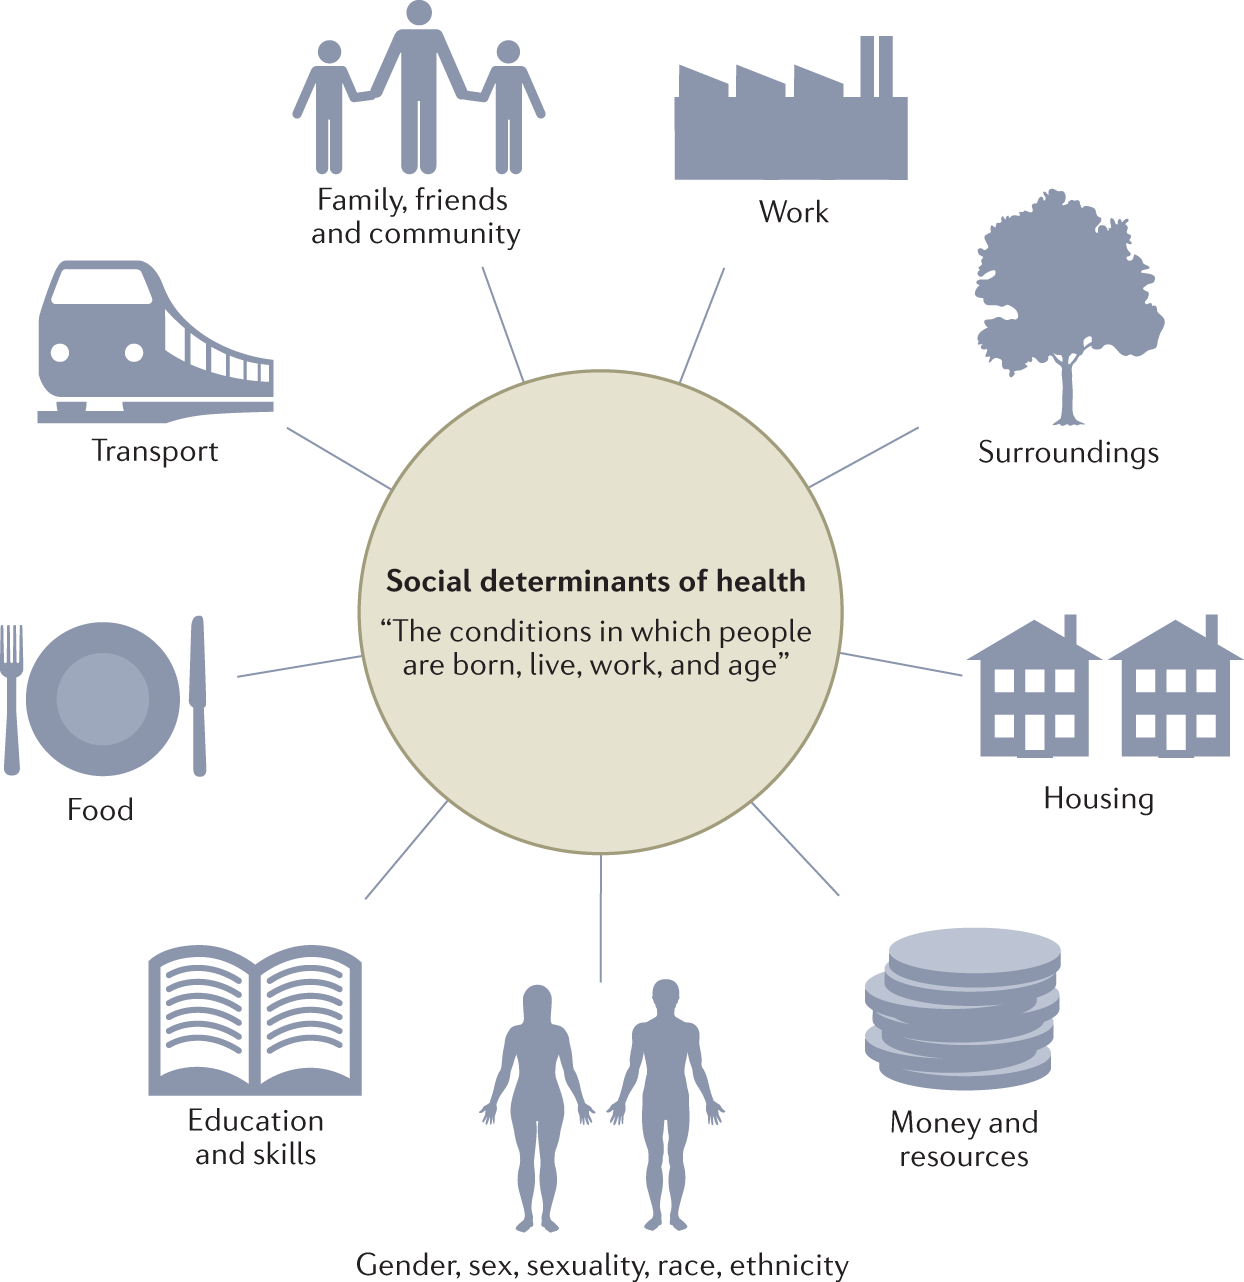 An infographic showing different types of Social determinants of health. In the center there is a gray circle with the words "The conditions in which people are born, live, work, and age." Around the circle are images paired with the different types of social determinants of health. There are 9 points, those are: 1. Family friends and community 2. Work 3. Surroundings 4. Housing 5. Money and Resources 6. Gender sex sexuality race ethnicity 7. Education and skills 8. Food and 9. Transportation